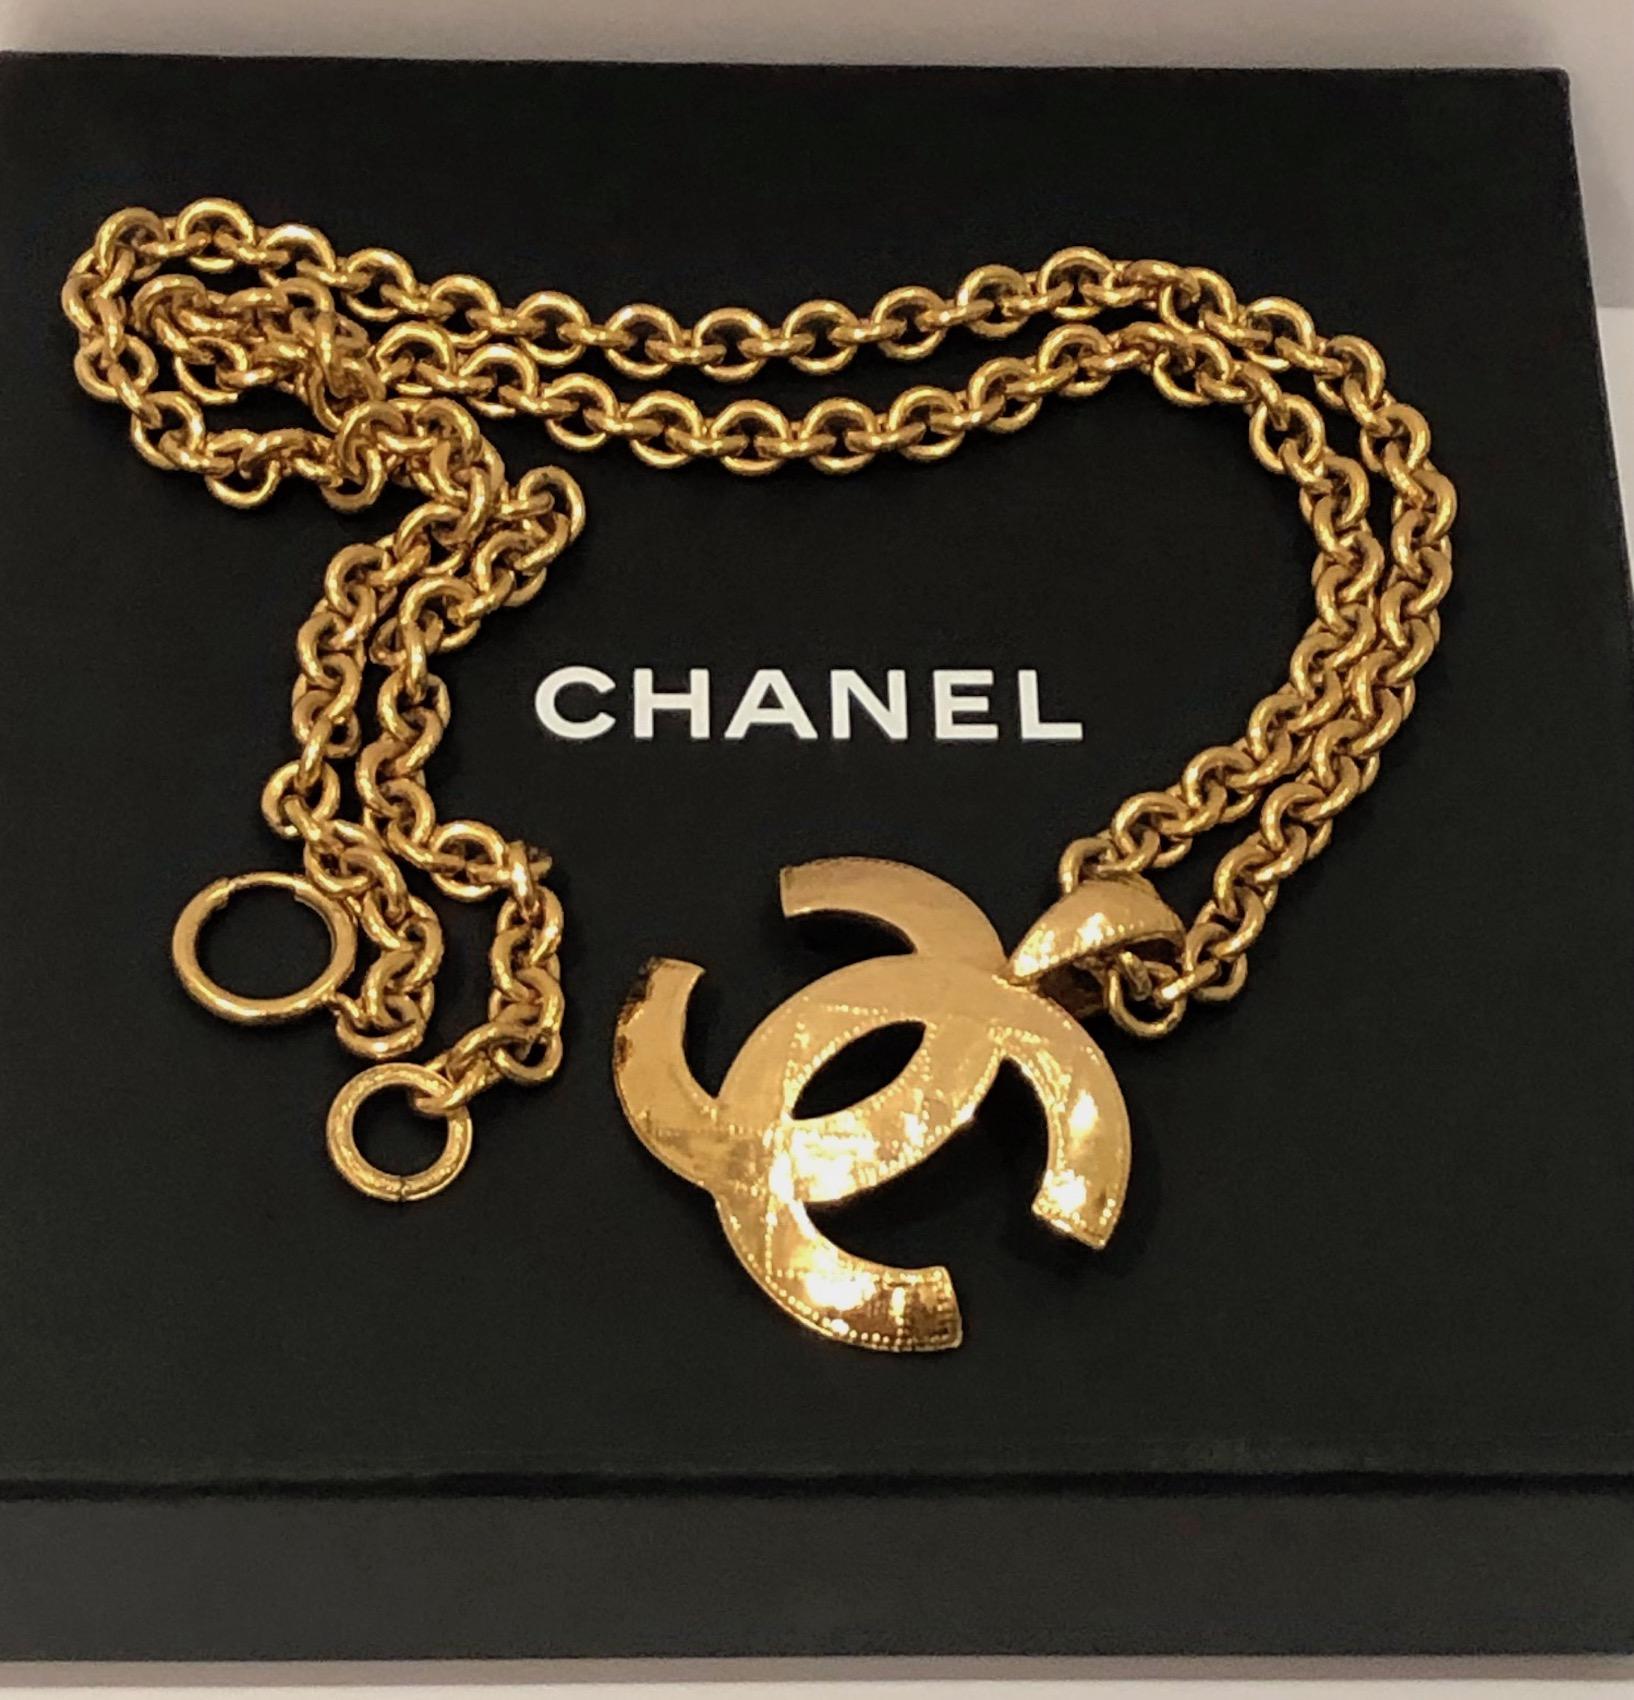 CHANEL 1994 CC Pendant Chain Necklace Vintage Gold Quilted
A very rare vintage CHANEL Spring 1994 large CC interlocking logo chain necklace in very good condition. Gold tone cable link chain. A large sliding CC logo pendant (6 cm) with quilted